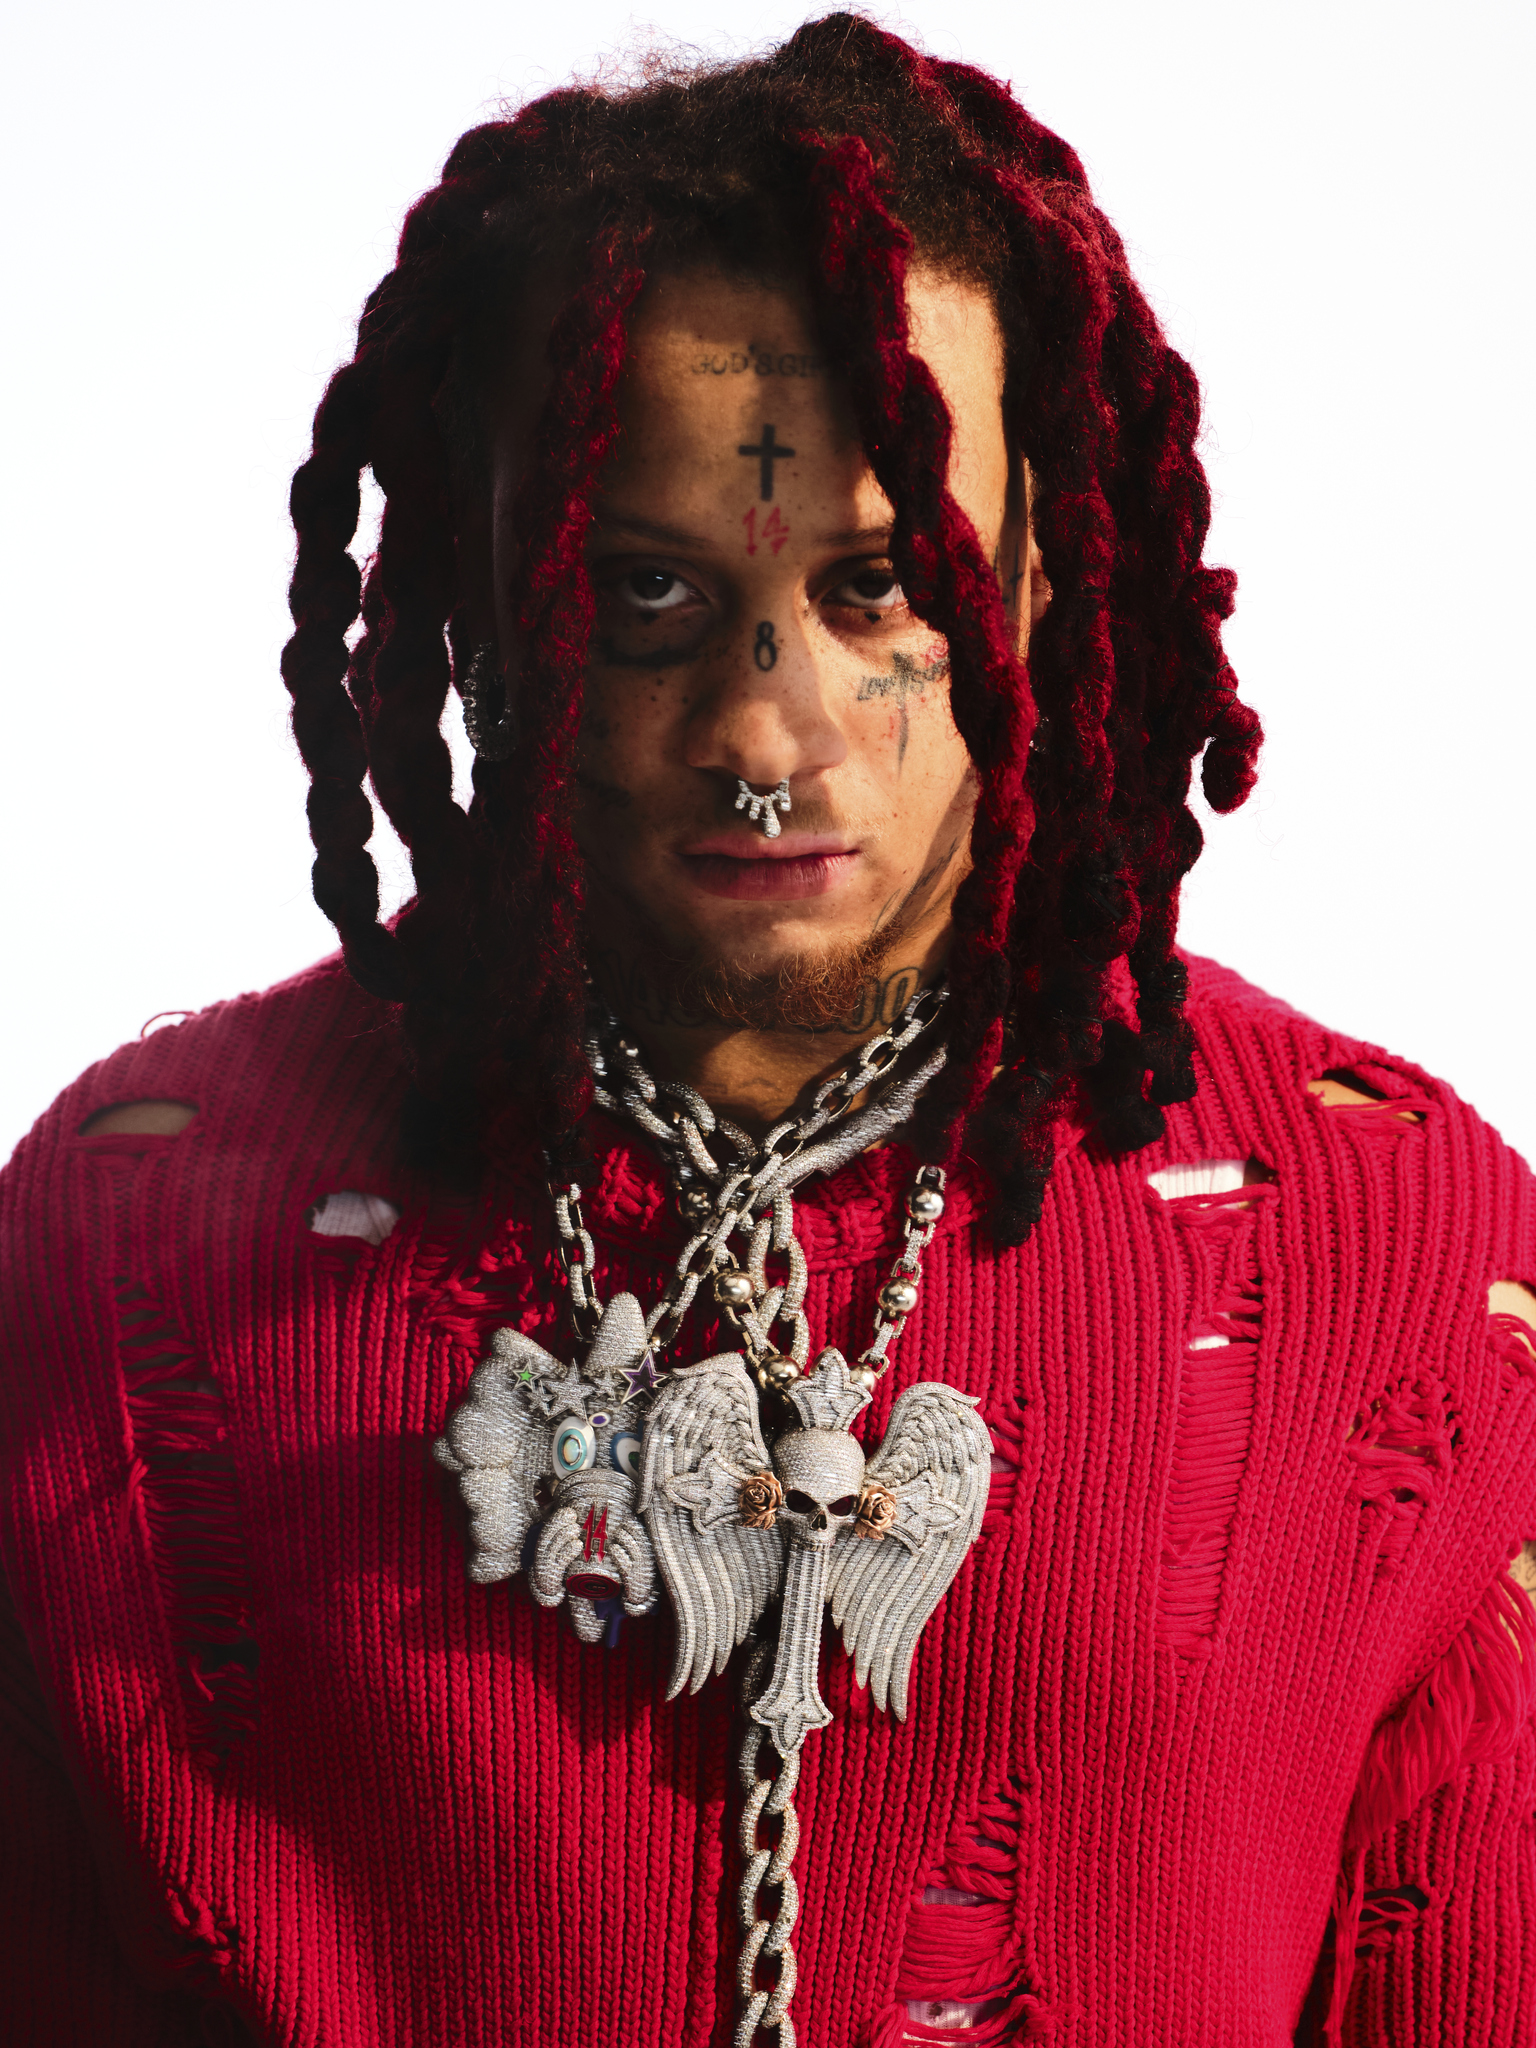 TRIPPIE REDD RELEASES HIS HIGHLY ANTICIPATED ALBUM A LOVE LETTER TO YOU 5